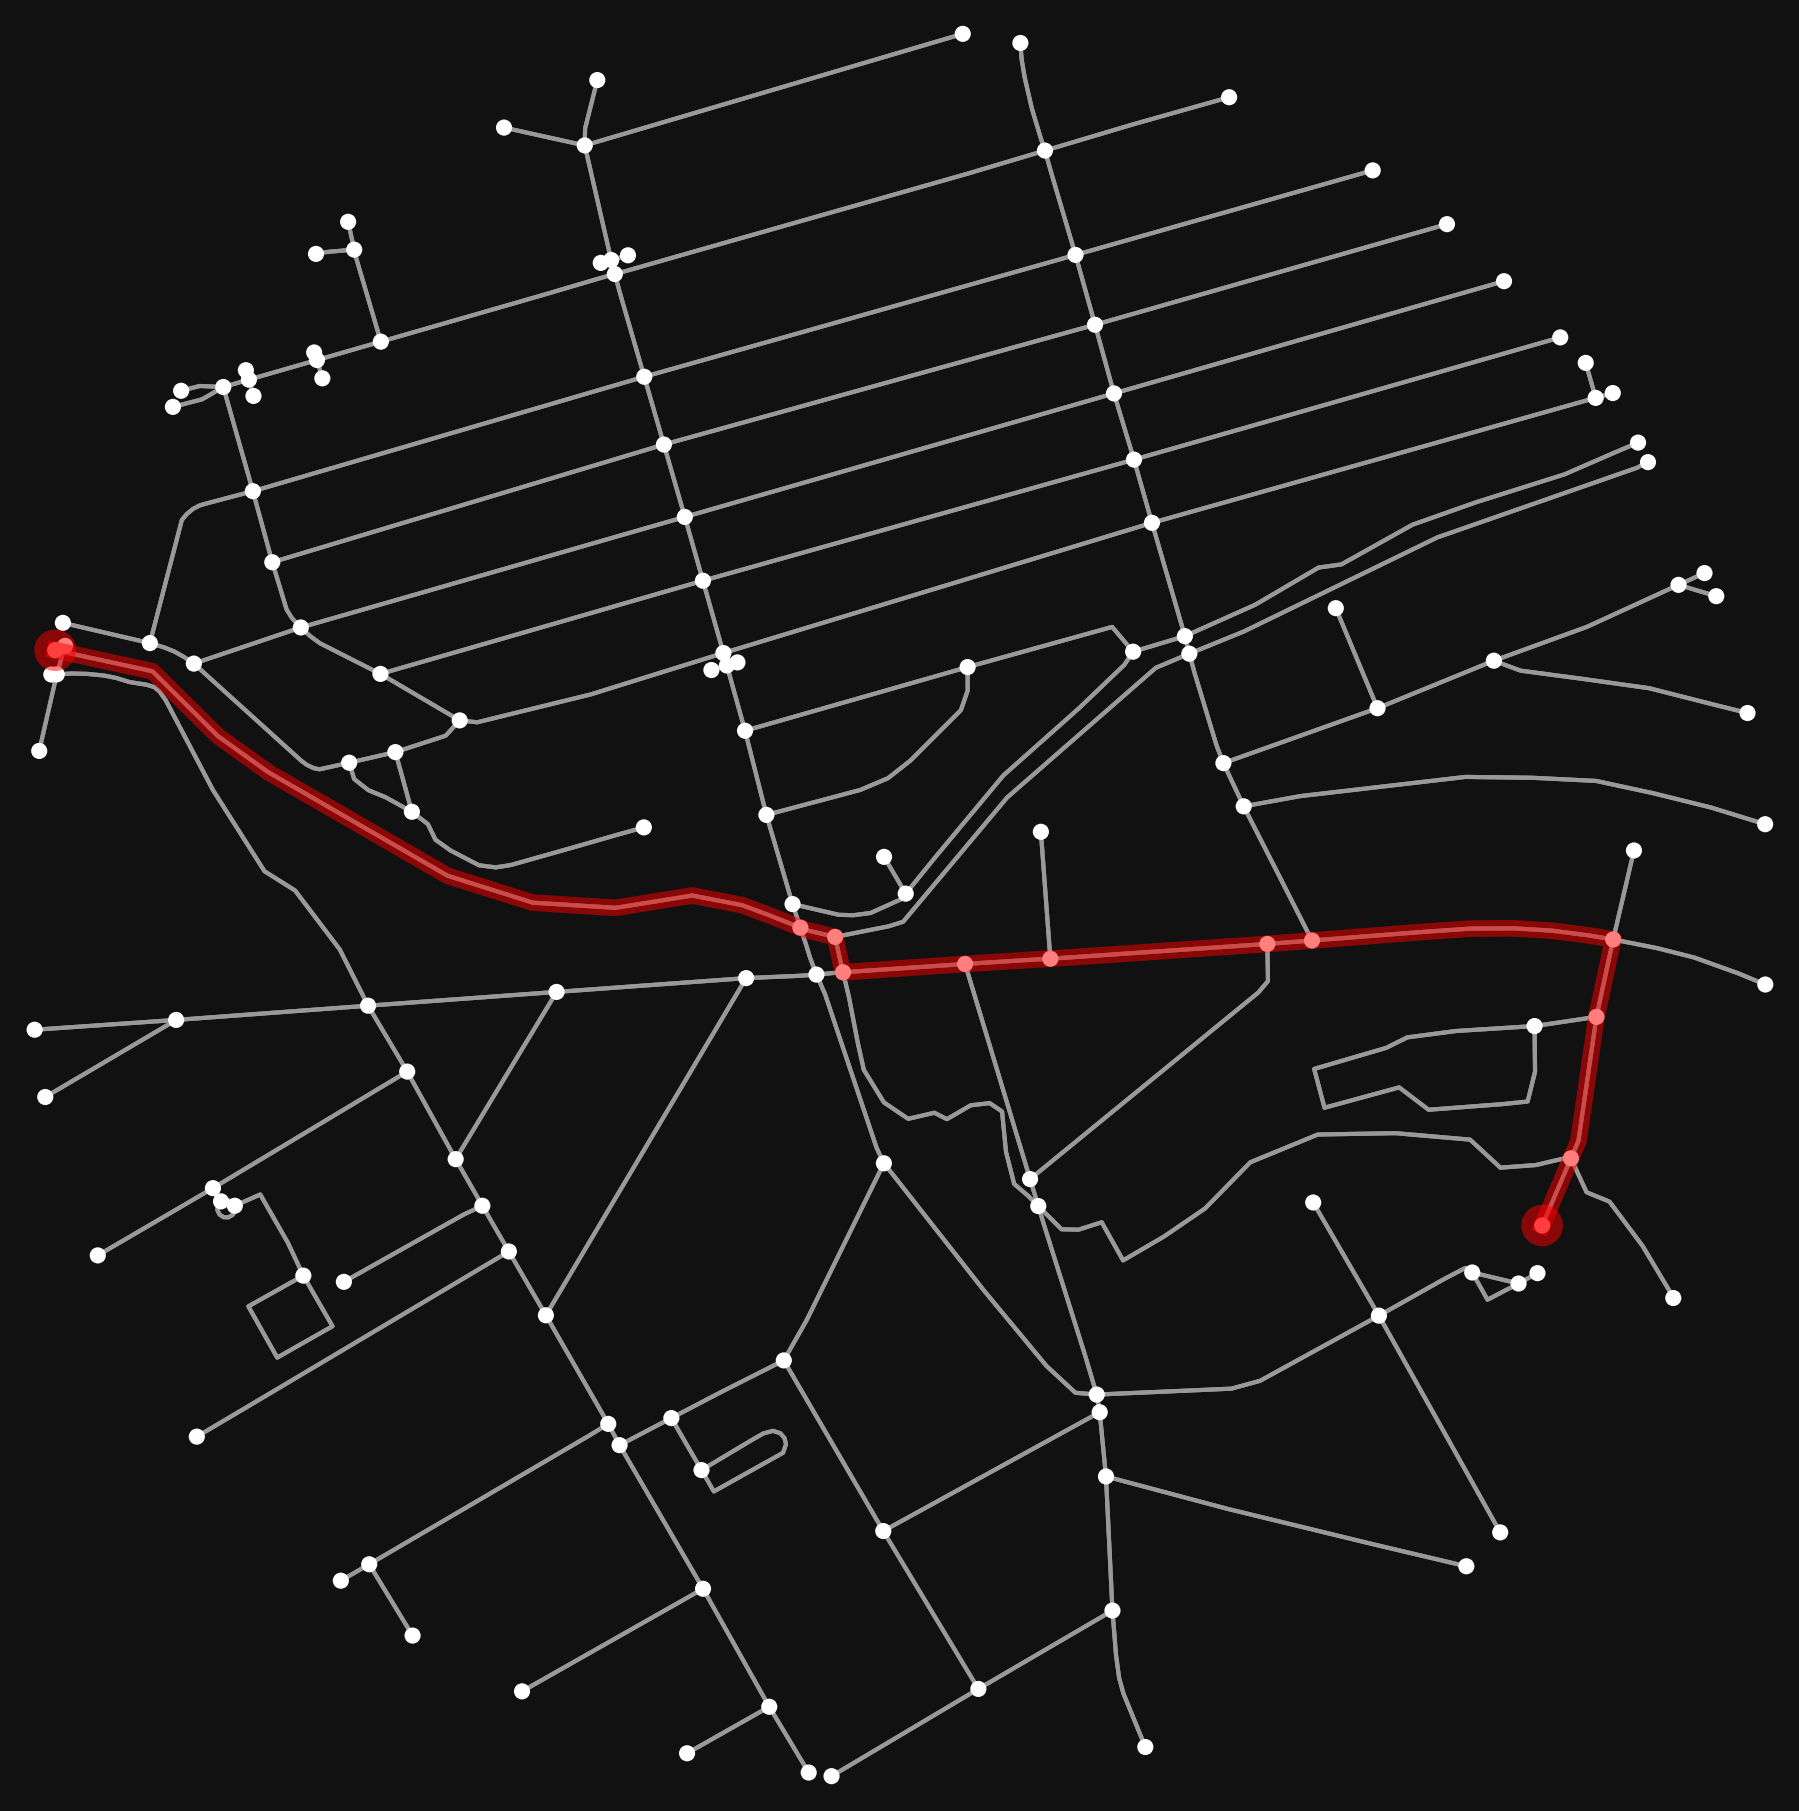 Using the algorithm use Diliman Creek and E. Rodriguez Sr. Ave. as inputs for shortest-path sample route between a random pair origin and destination points. The red path is the shortest path out of all possible paths determined by Dijkstra&rsquo;s algorithm.